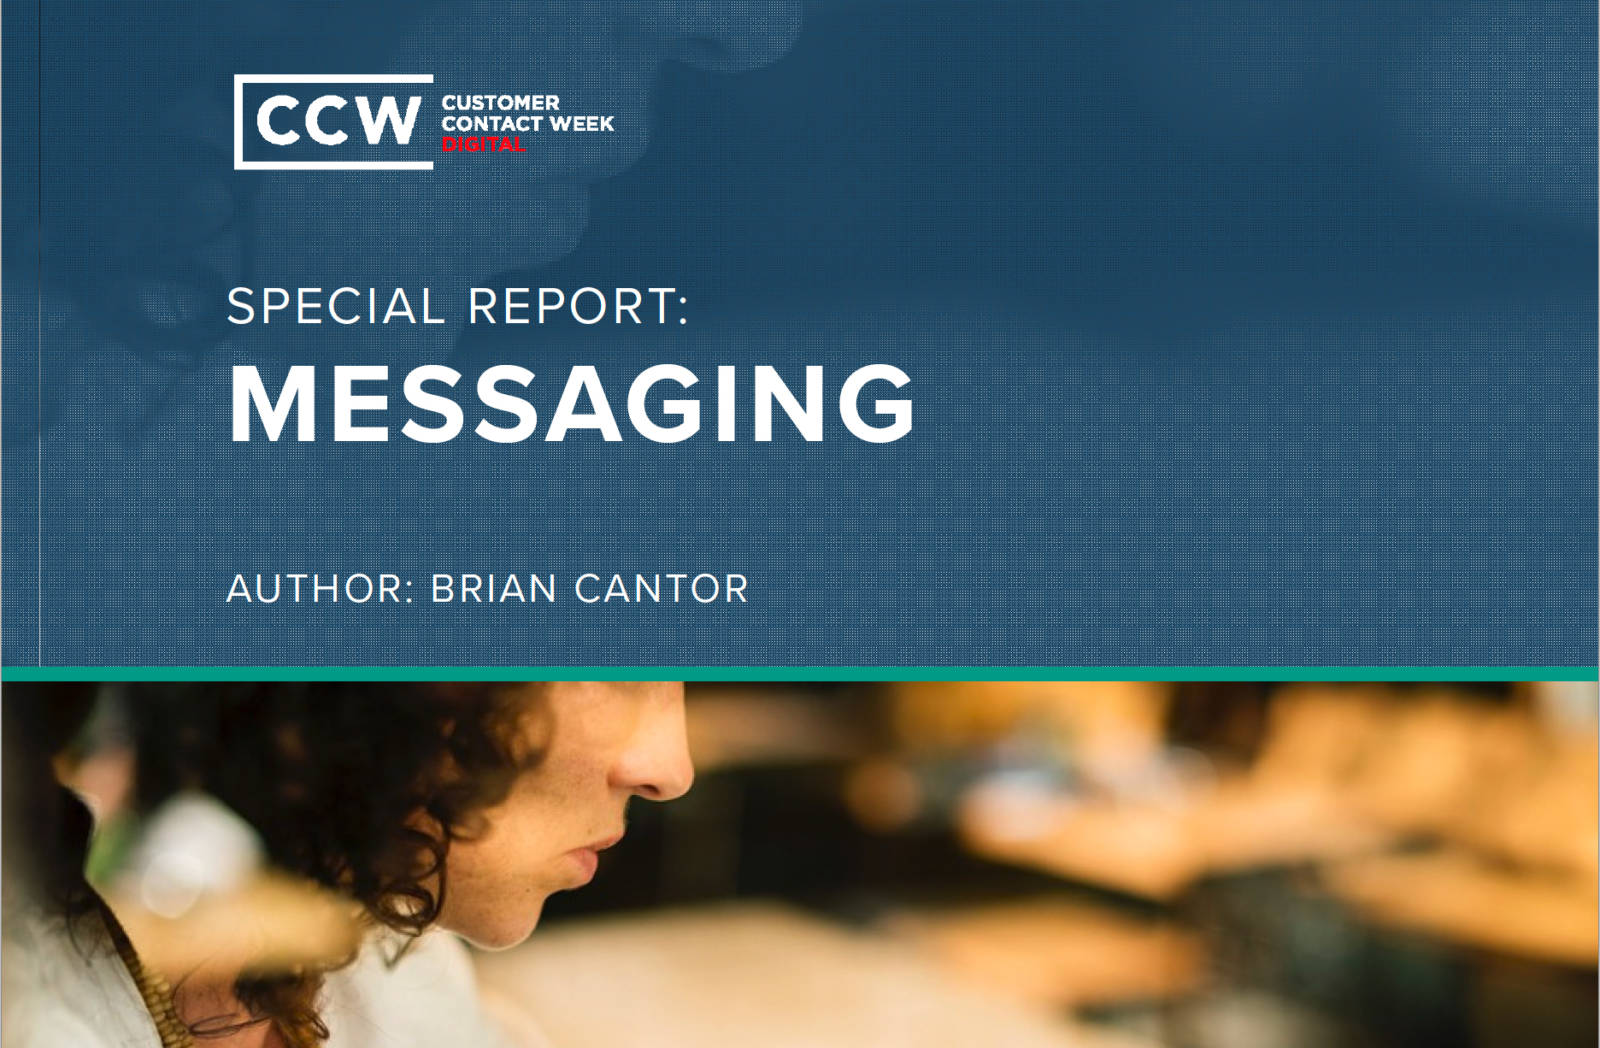 CCW Special Report on Messaging